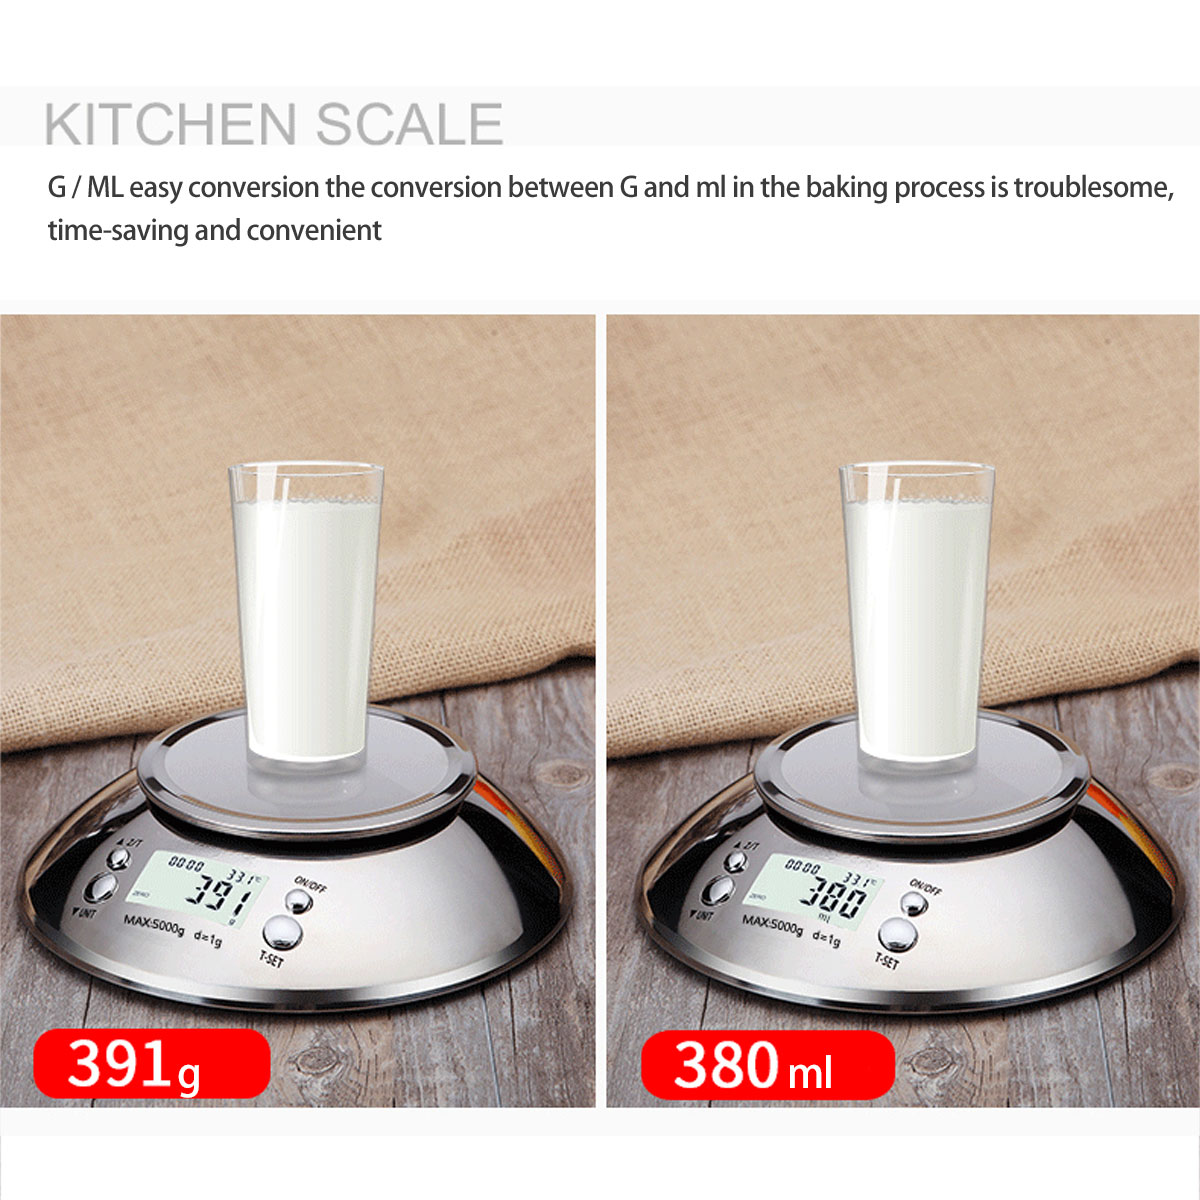 Digital-Kitchen-Scale-LCD-Display-Stainless-Steel-Baking-High-Precision-Removable-Kitchen-Scale-1859940-4